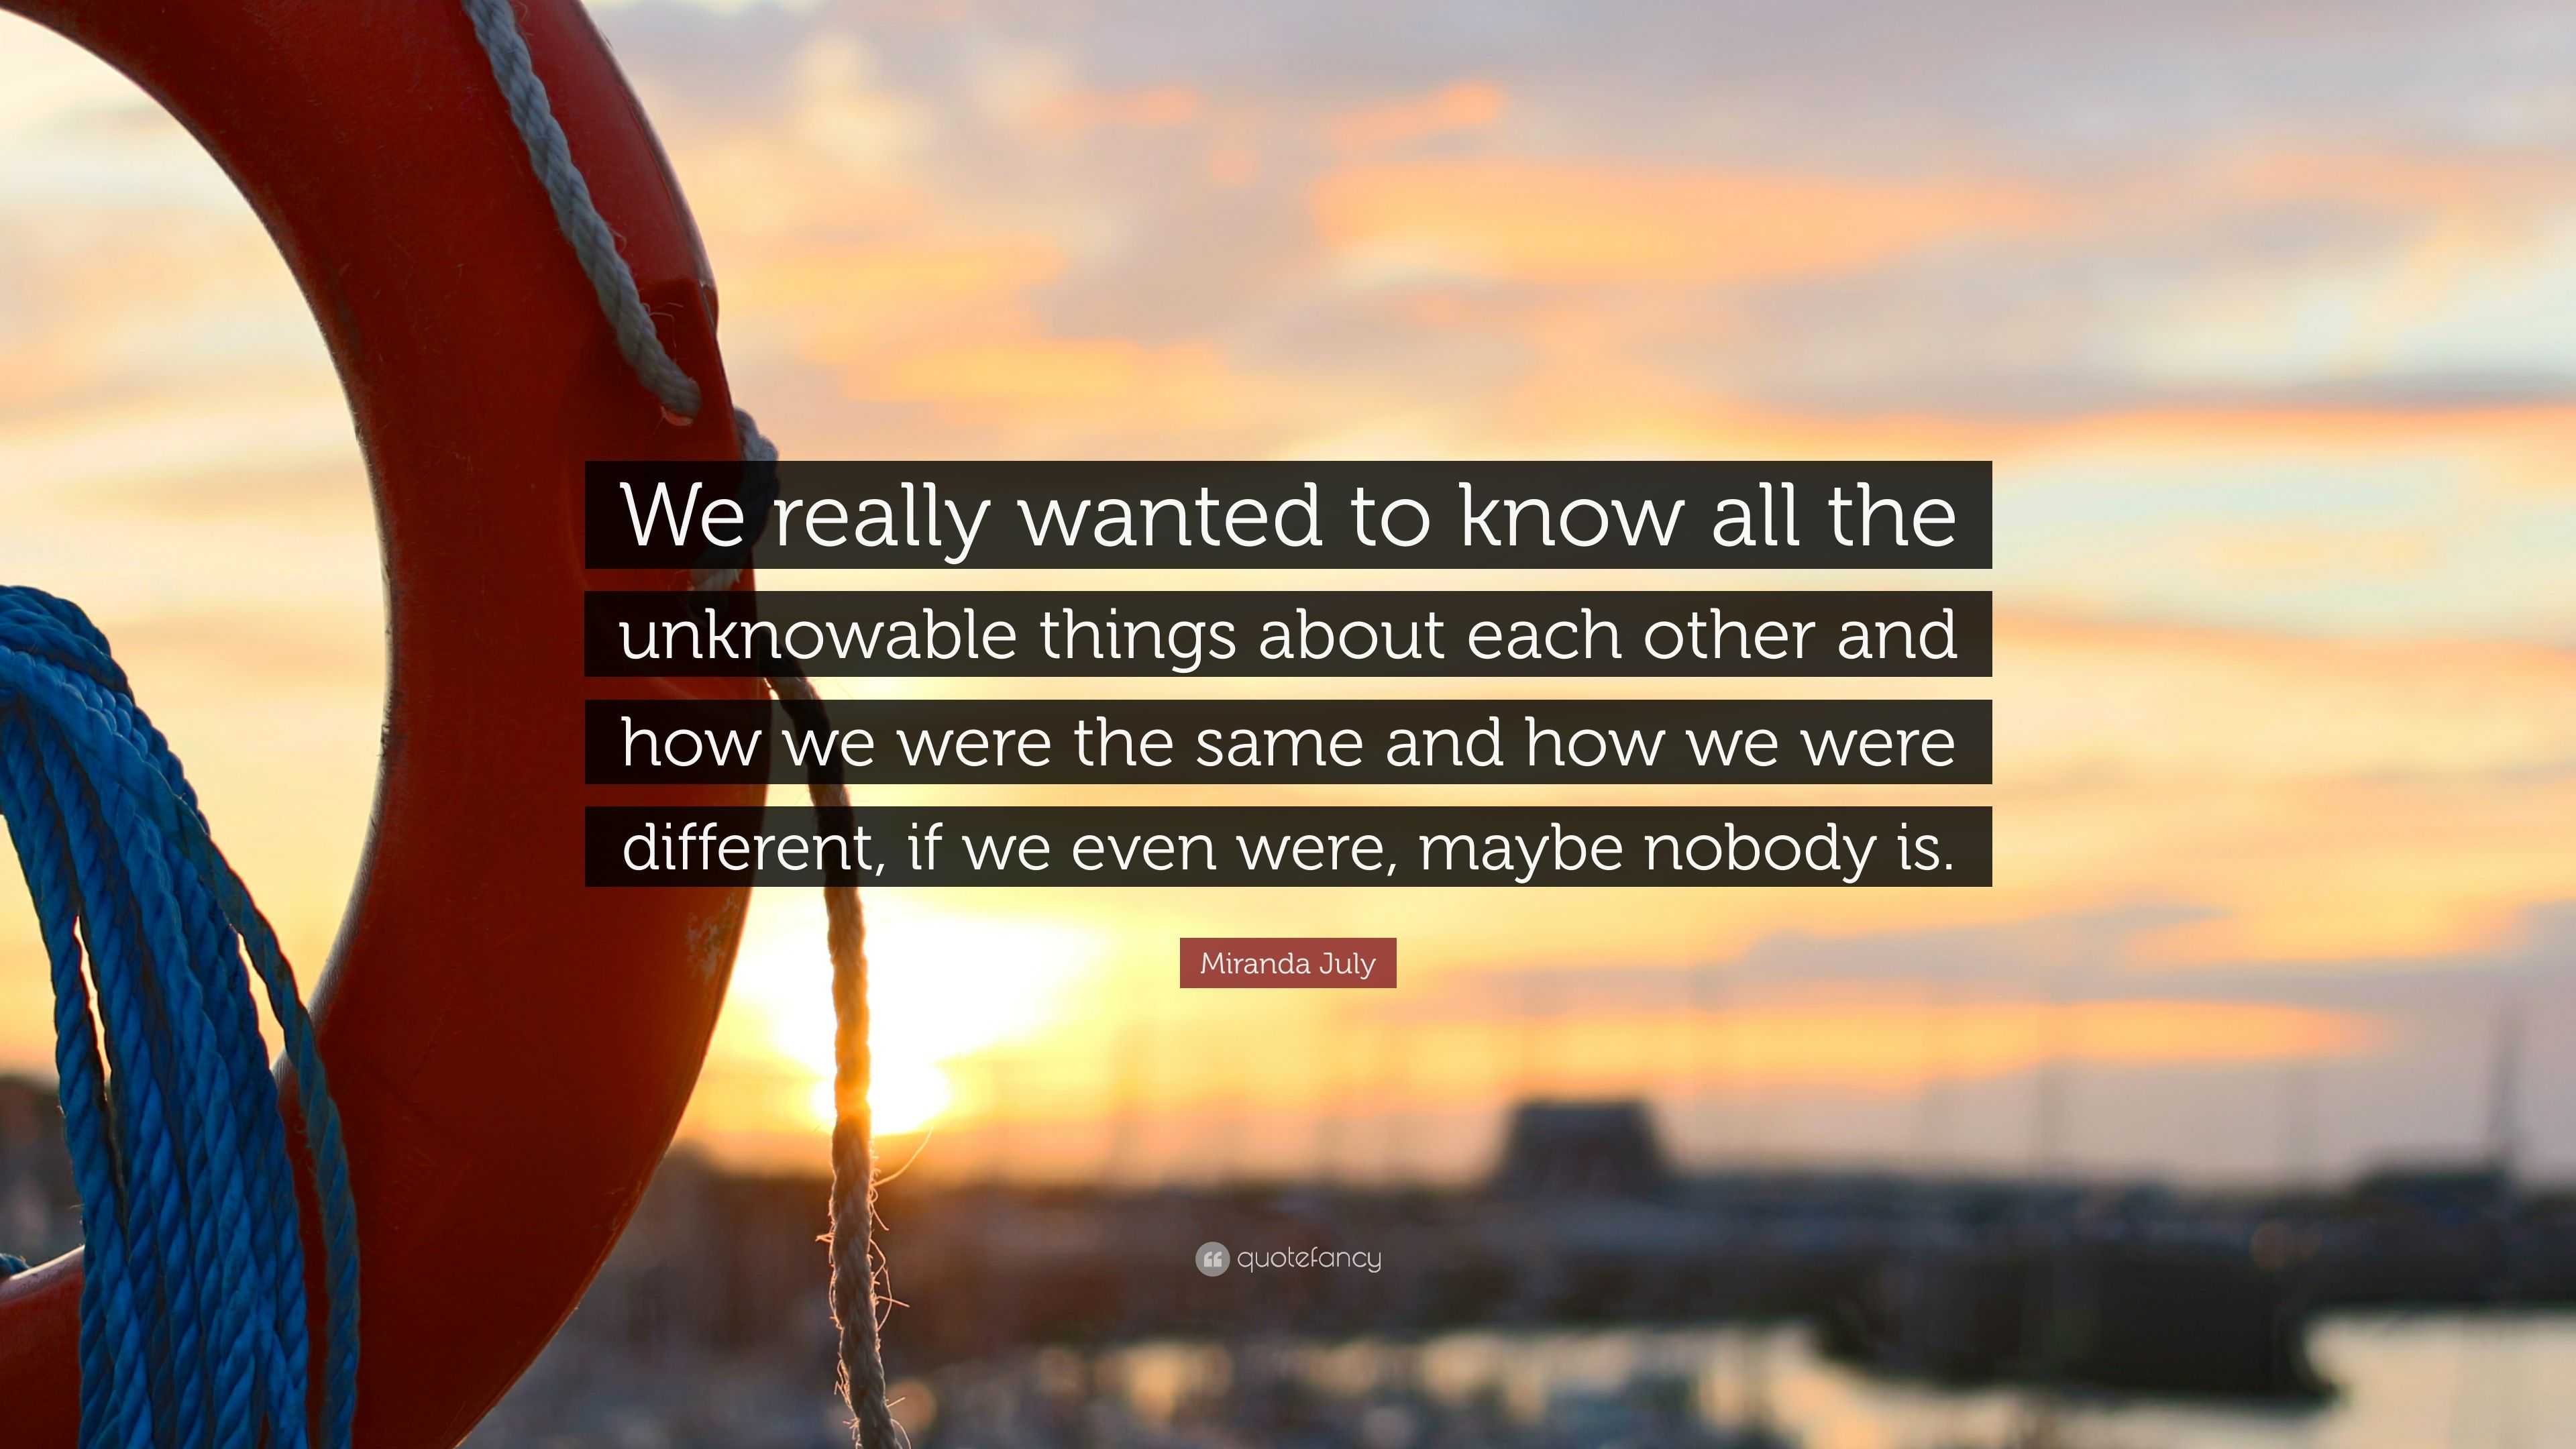 Miranda July Quote: “We really wanted to know all the unknowable things ...